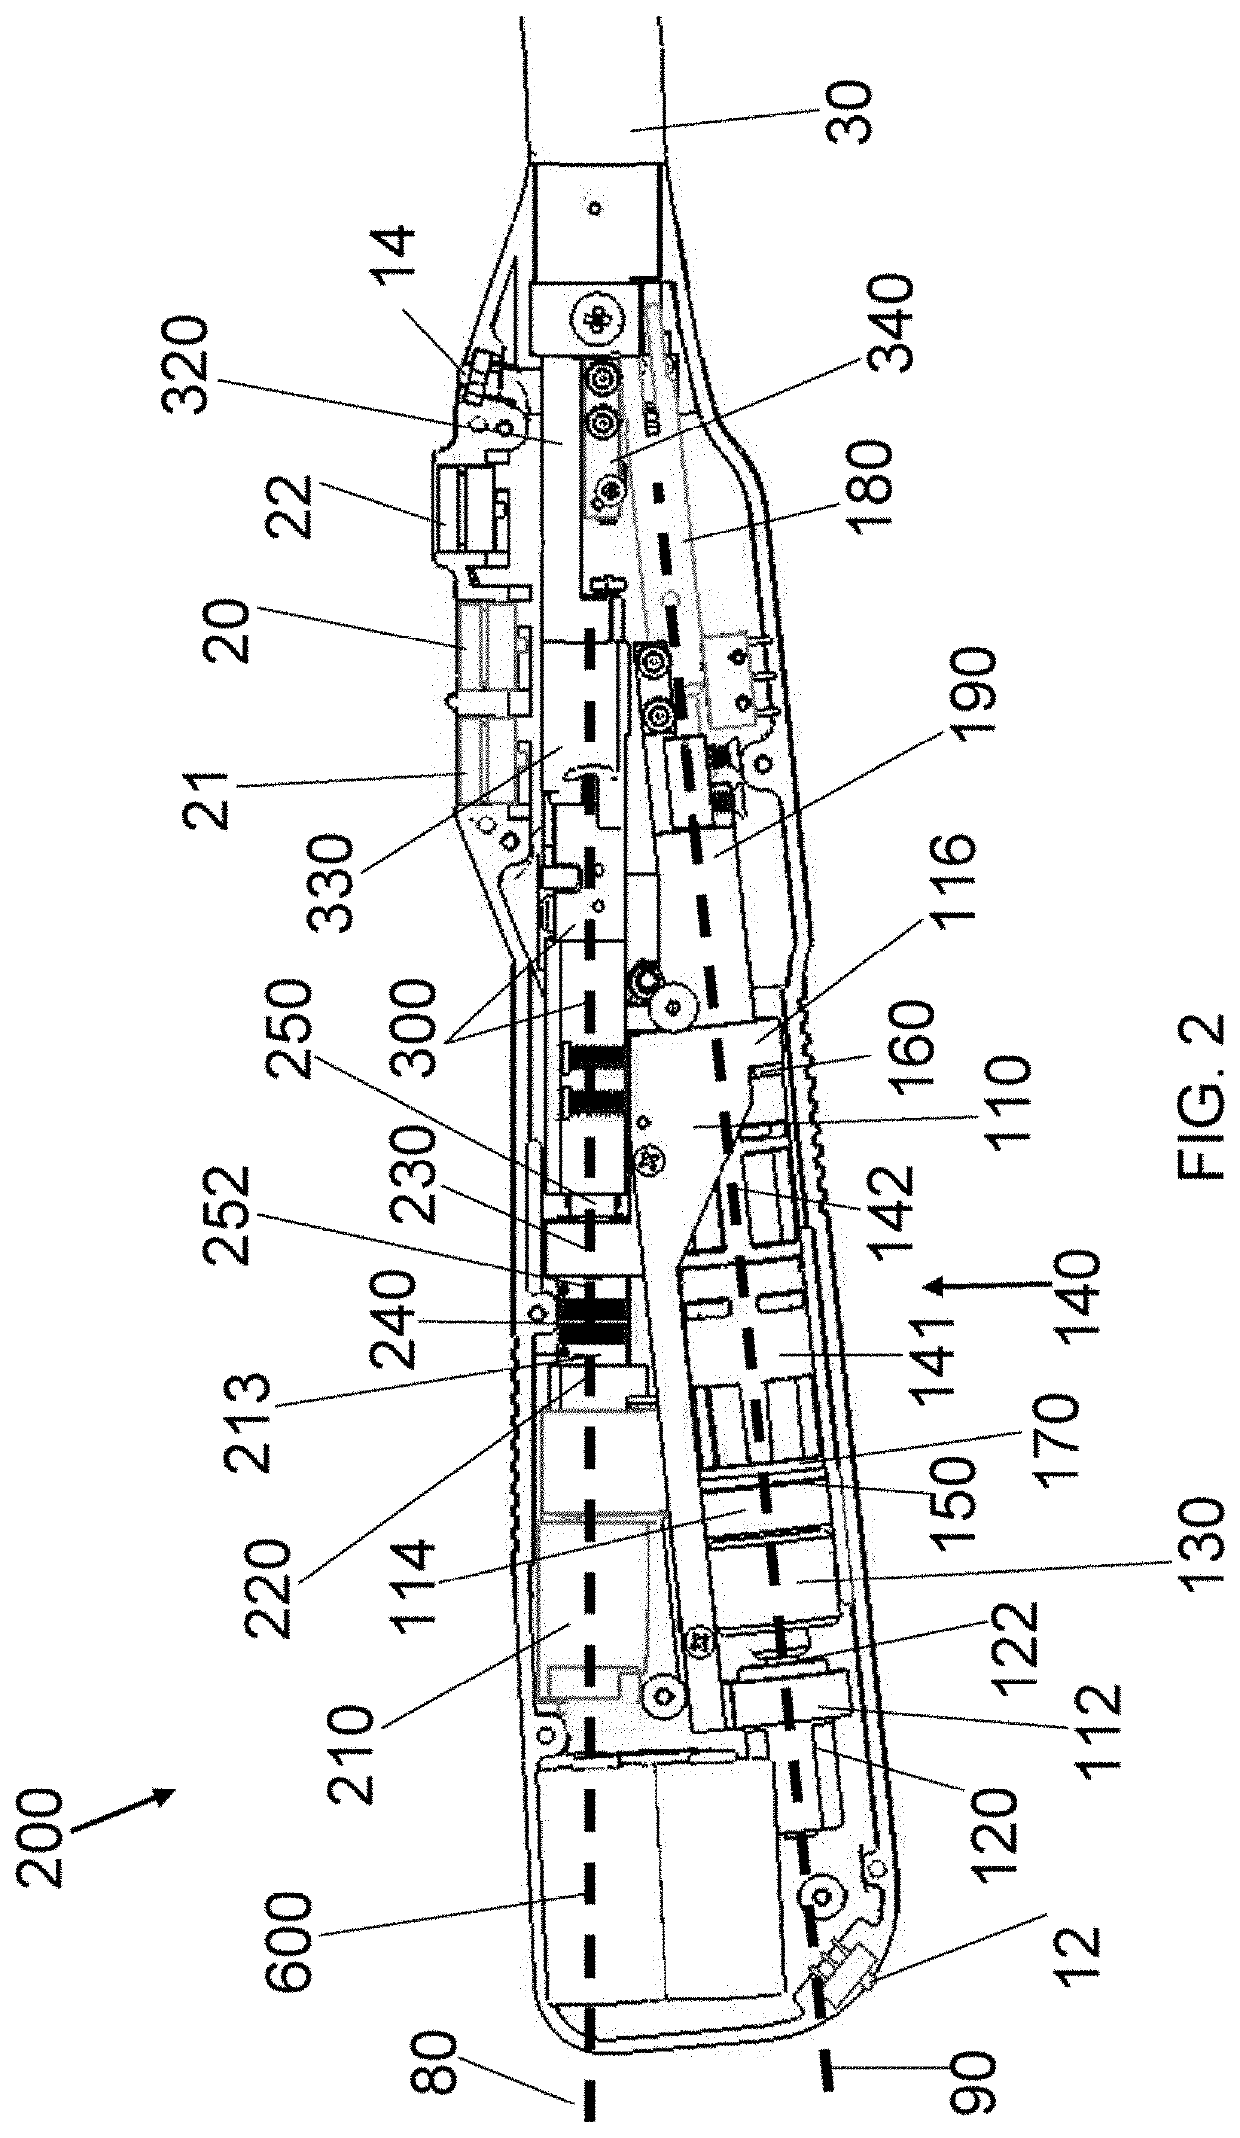 Electrically Powered Surgical Instrument with Manual Release